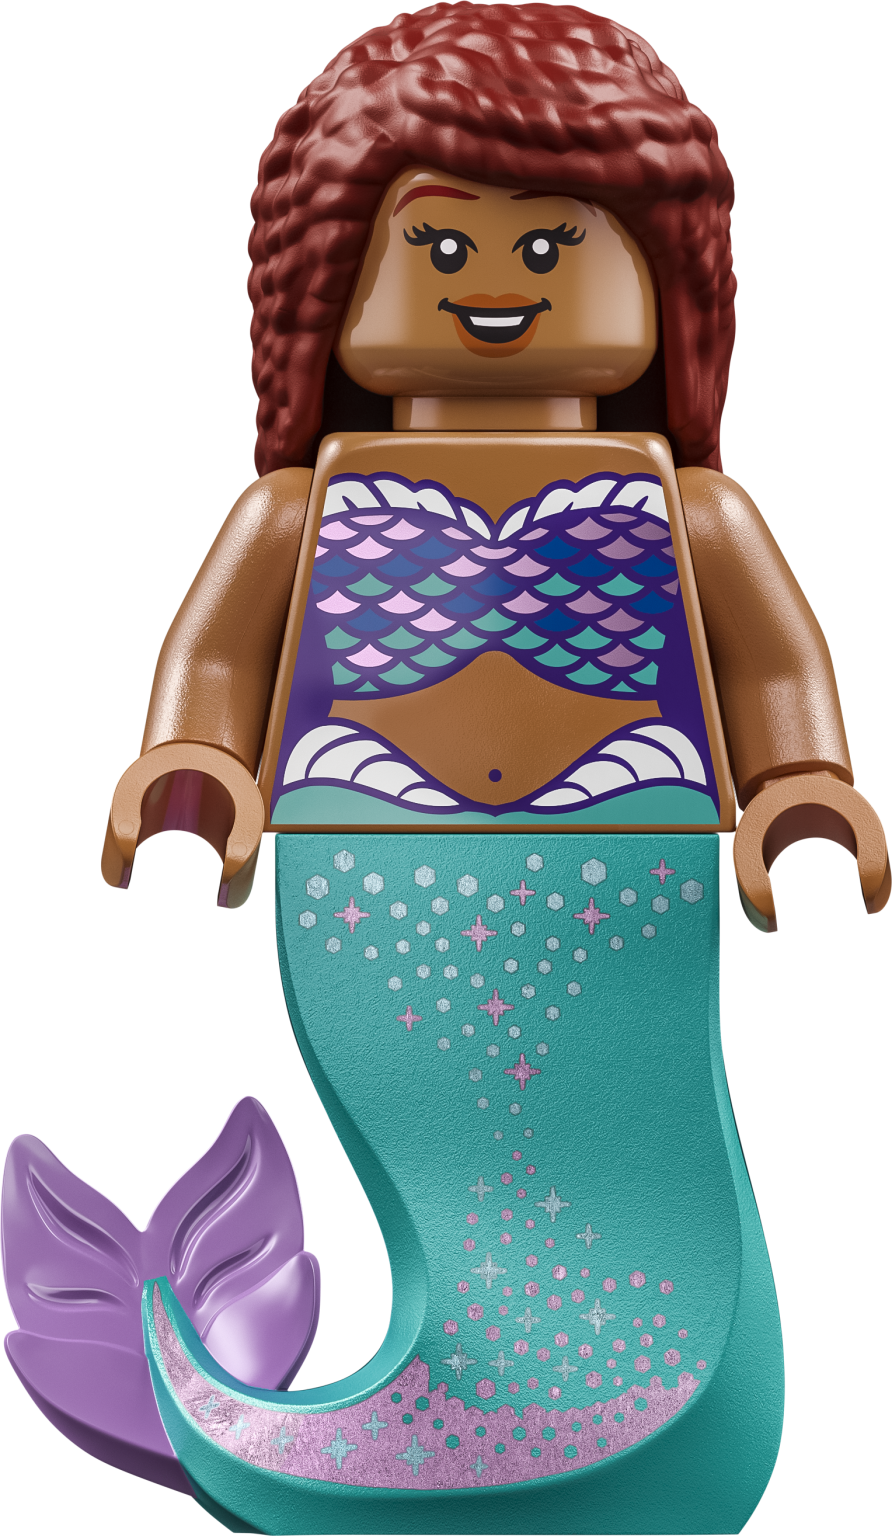 Preorder LEGO 43225 The Little Mermaid Royal Clamshell now